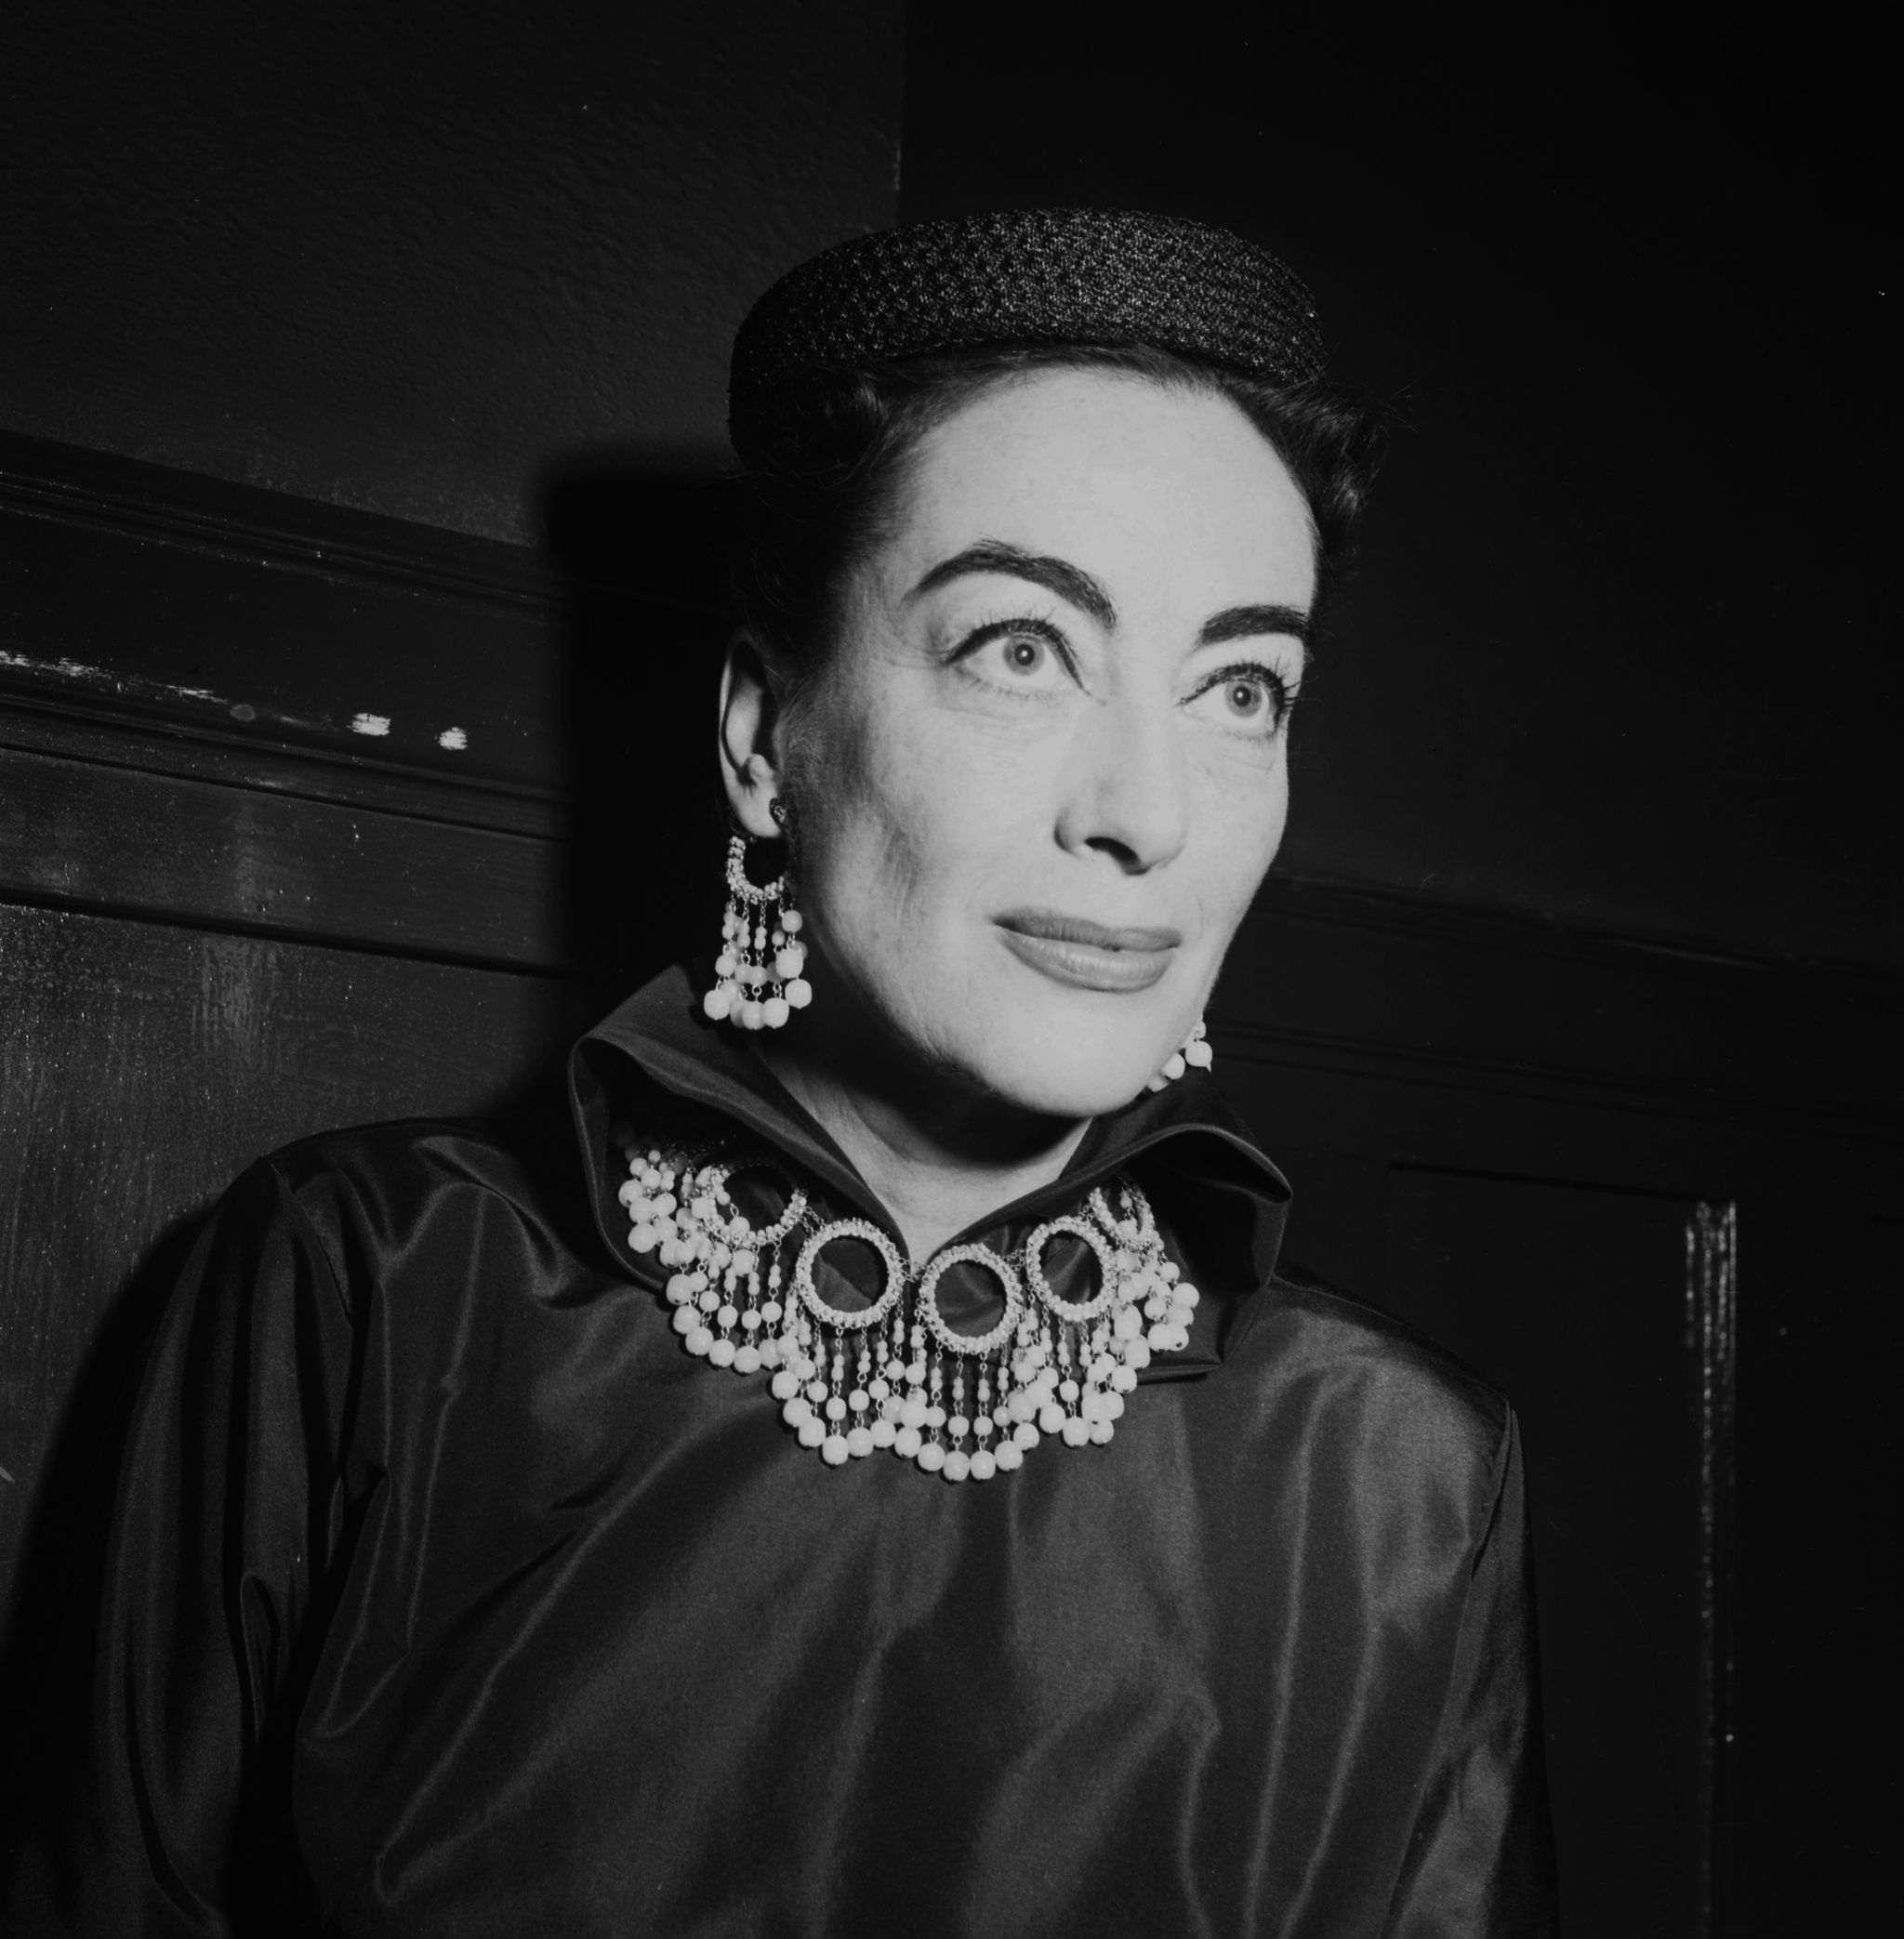 los angeles   may 18, 1954 actress joan crawford attends to guest during the joan crawford fashion show in los angeles, california photo by earl leafmichael ochs archivesgetty images